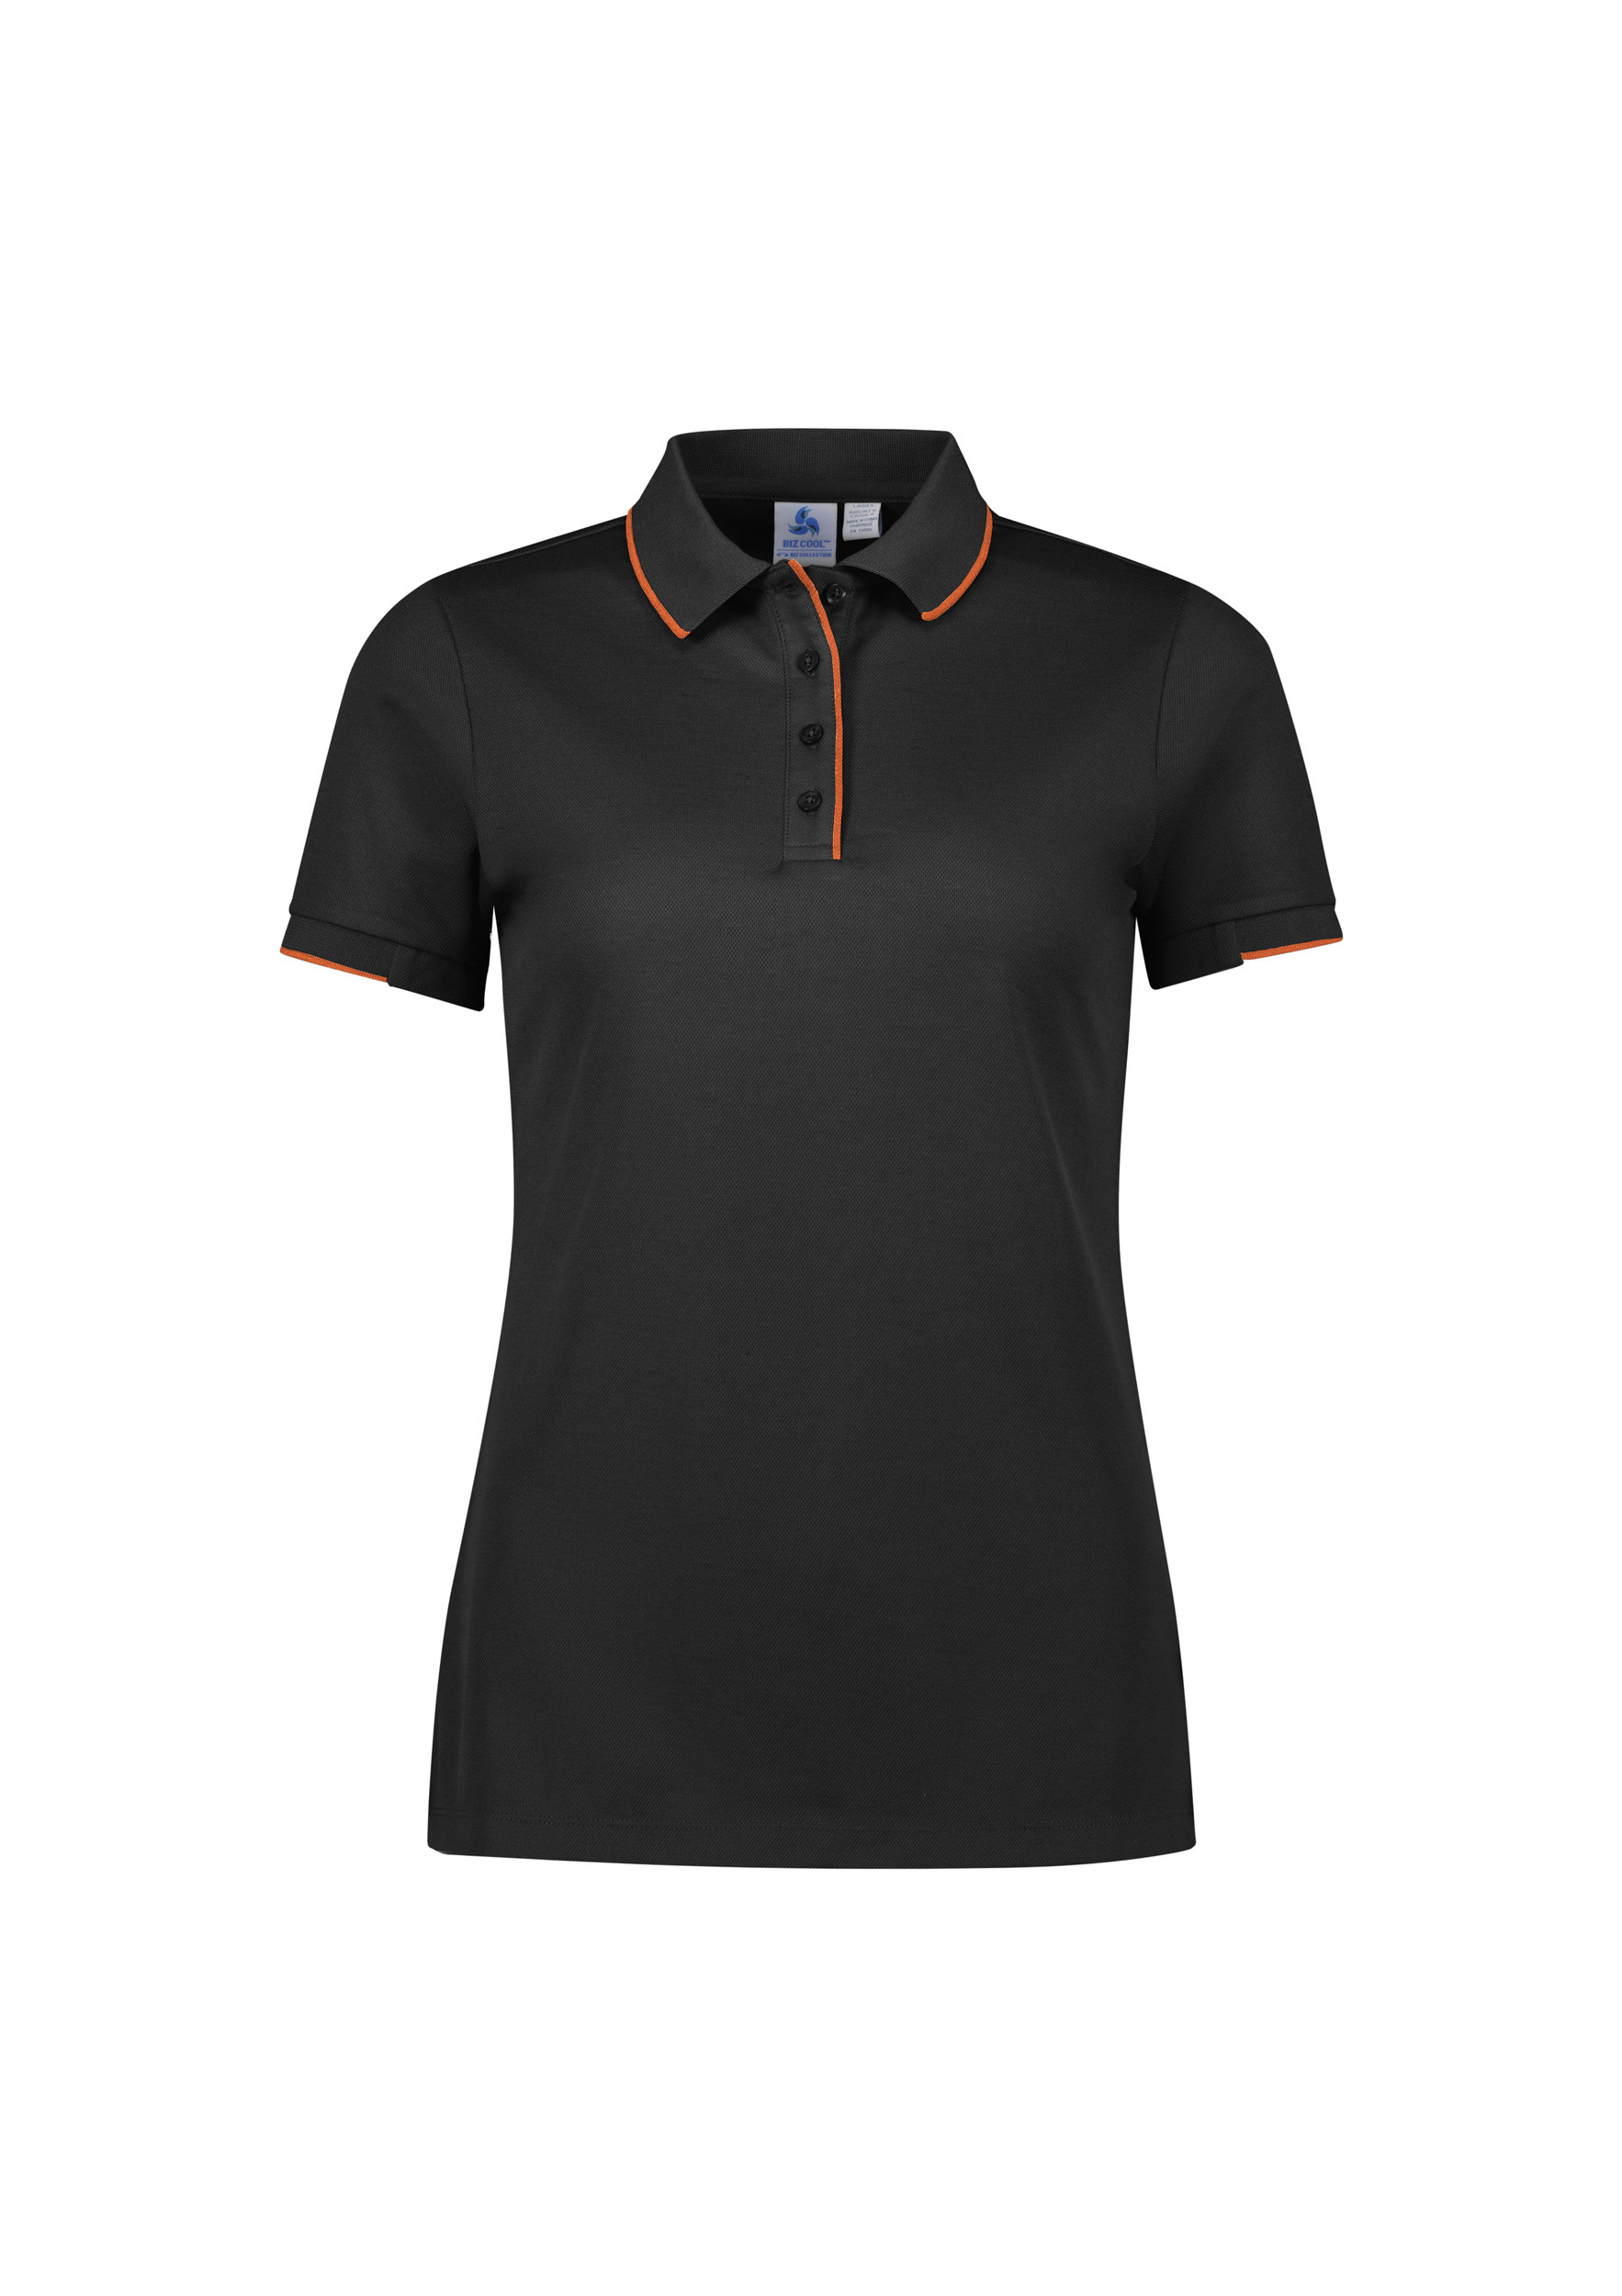 WOMENS FOCUS POLO BLK/ORG 10 80% POLY, 20% COTTON-BACK 185GSM